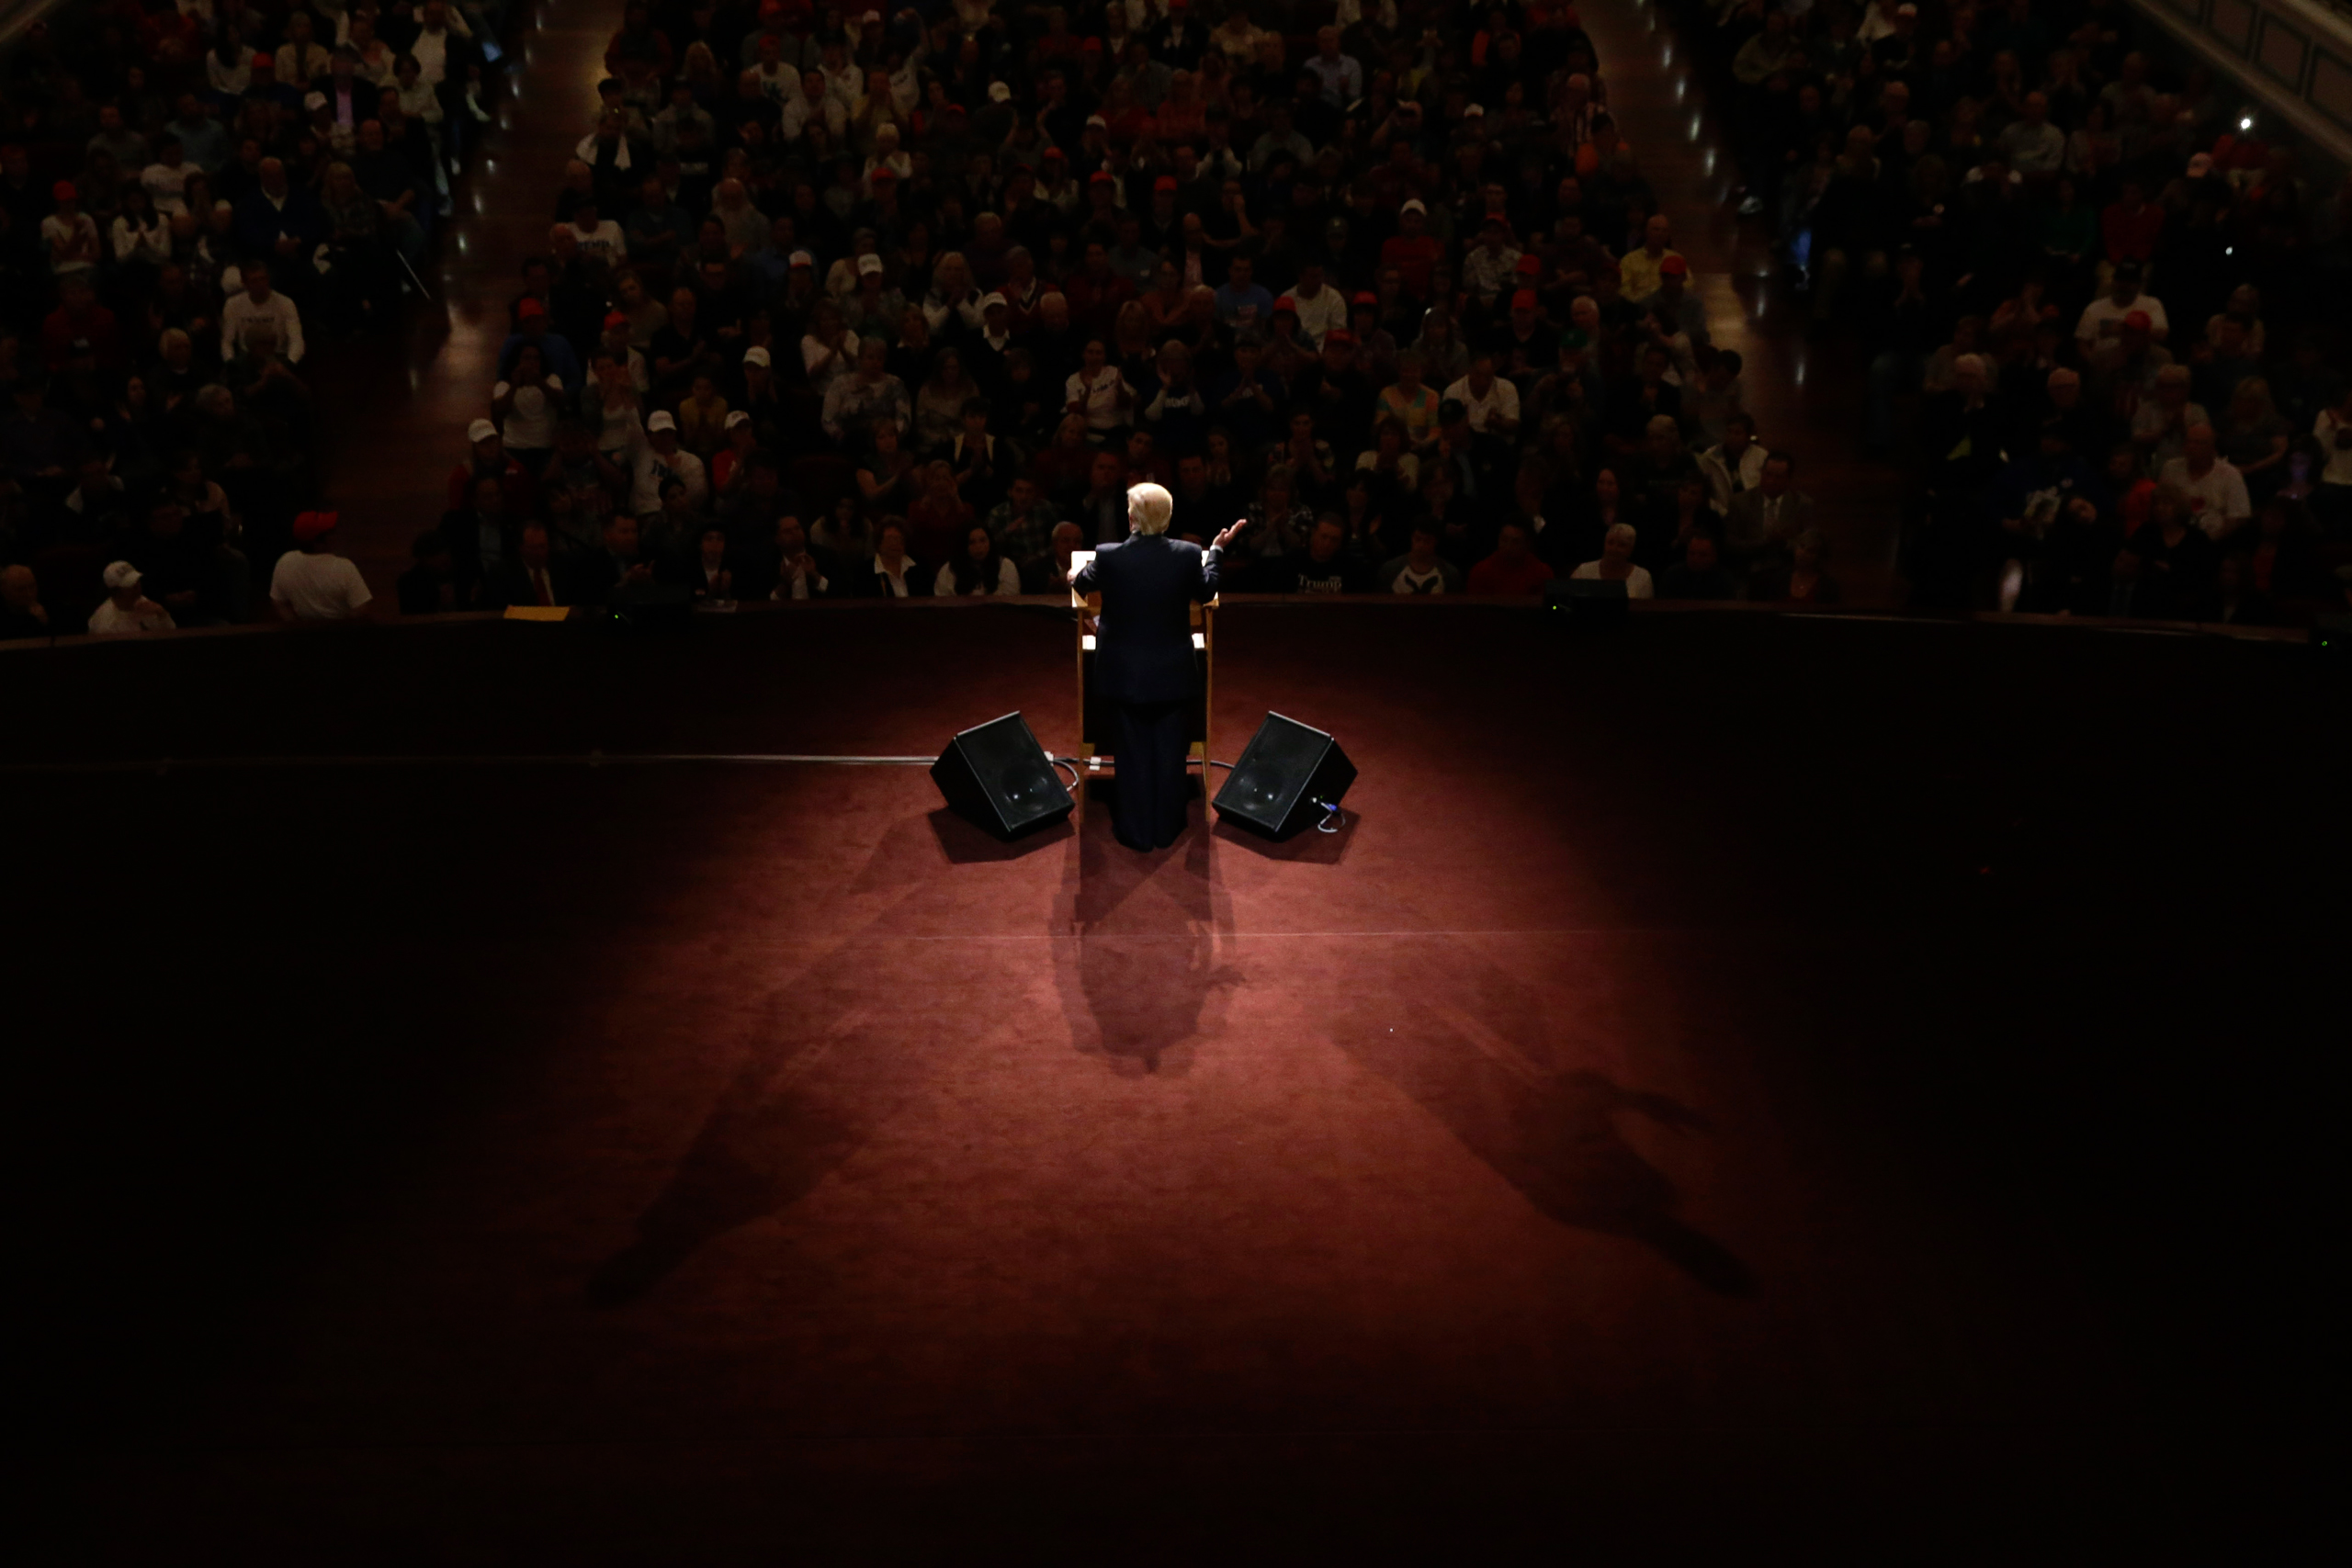 Republican presidential candidate Donald Trump speaks during a rally at The Palladium in Carmel, Ind., Monday, May 2, 2016. (AP Photo/Michael Conroy)